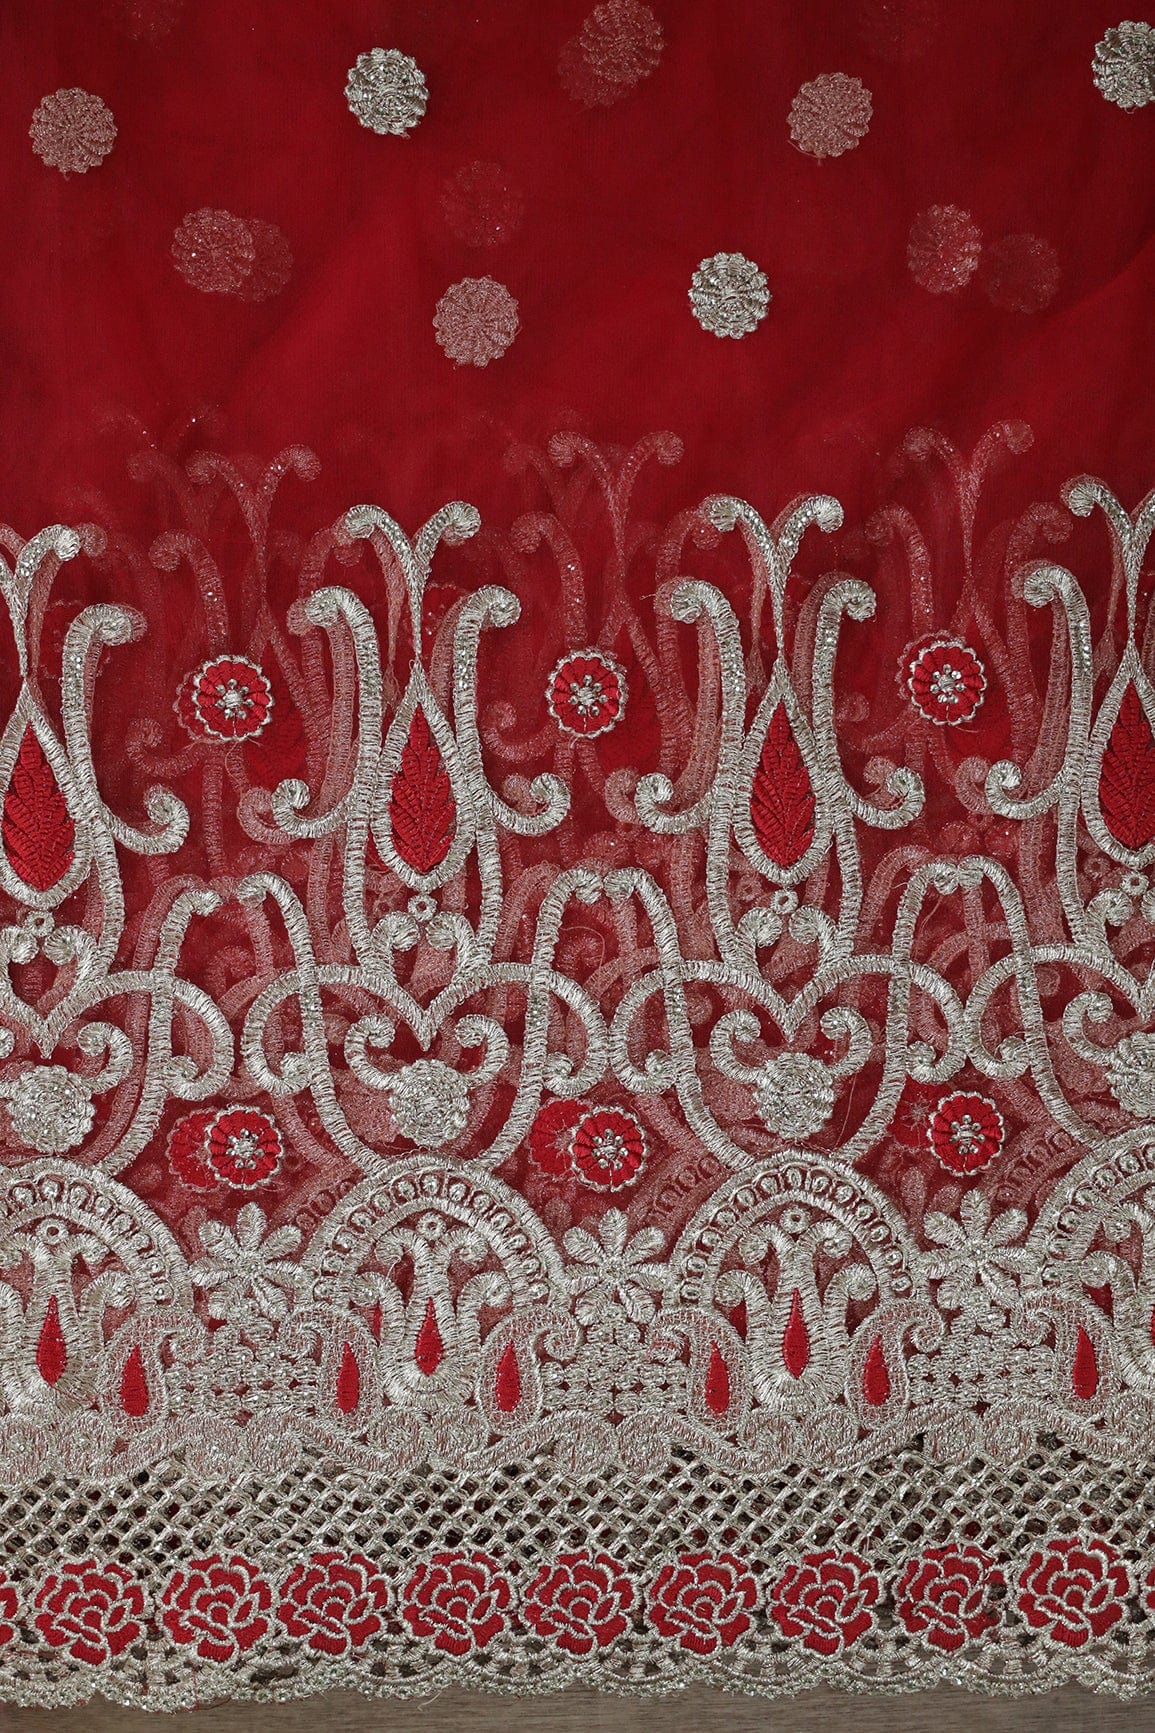 doeraa Embroidery Fabrics Big Width''56'' Red Thread With Zari Traditional Embroidery Work On Red Soft Net Fabric With Border